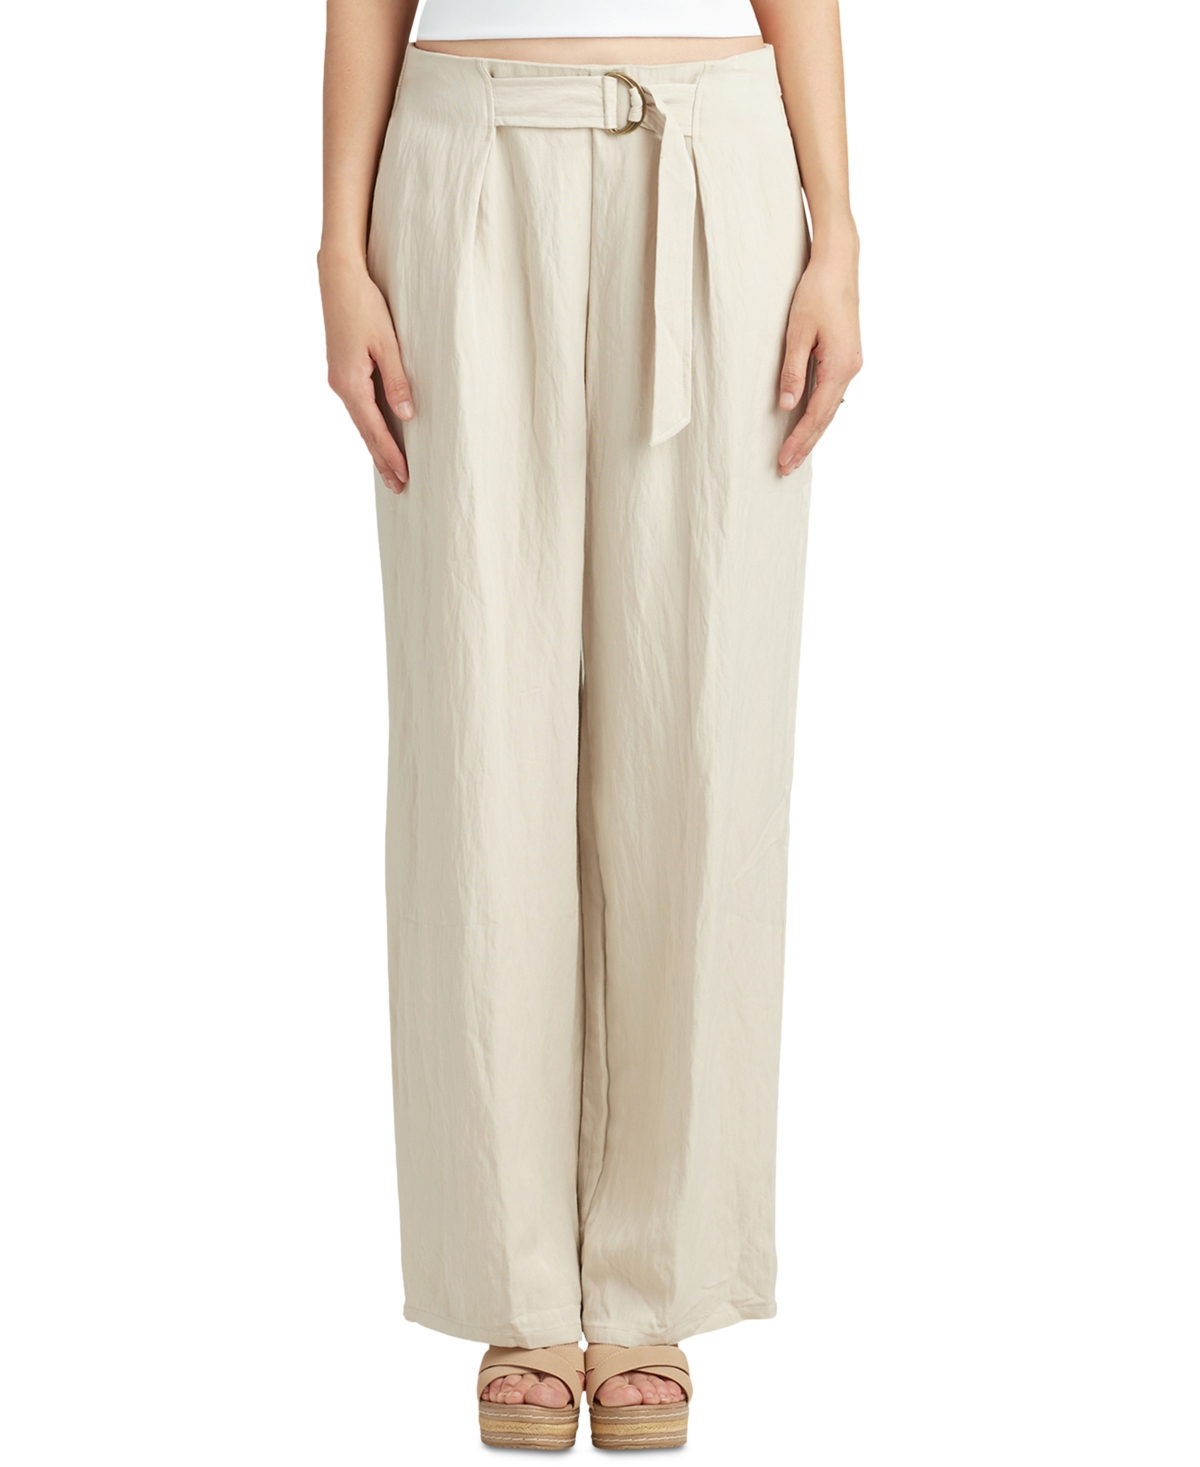 Juniors' Belted Pants - Sand